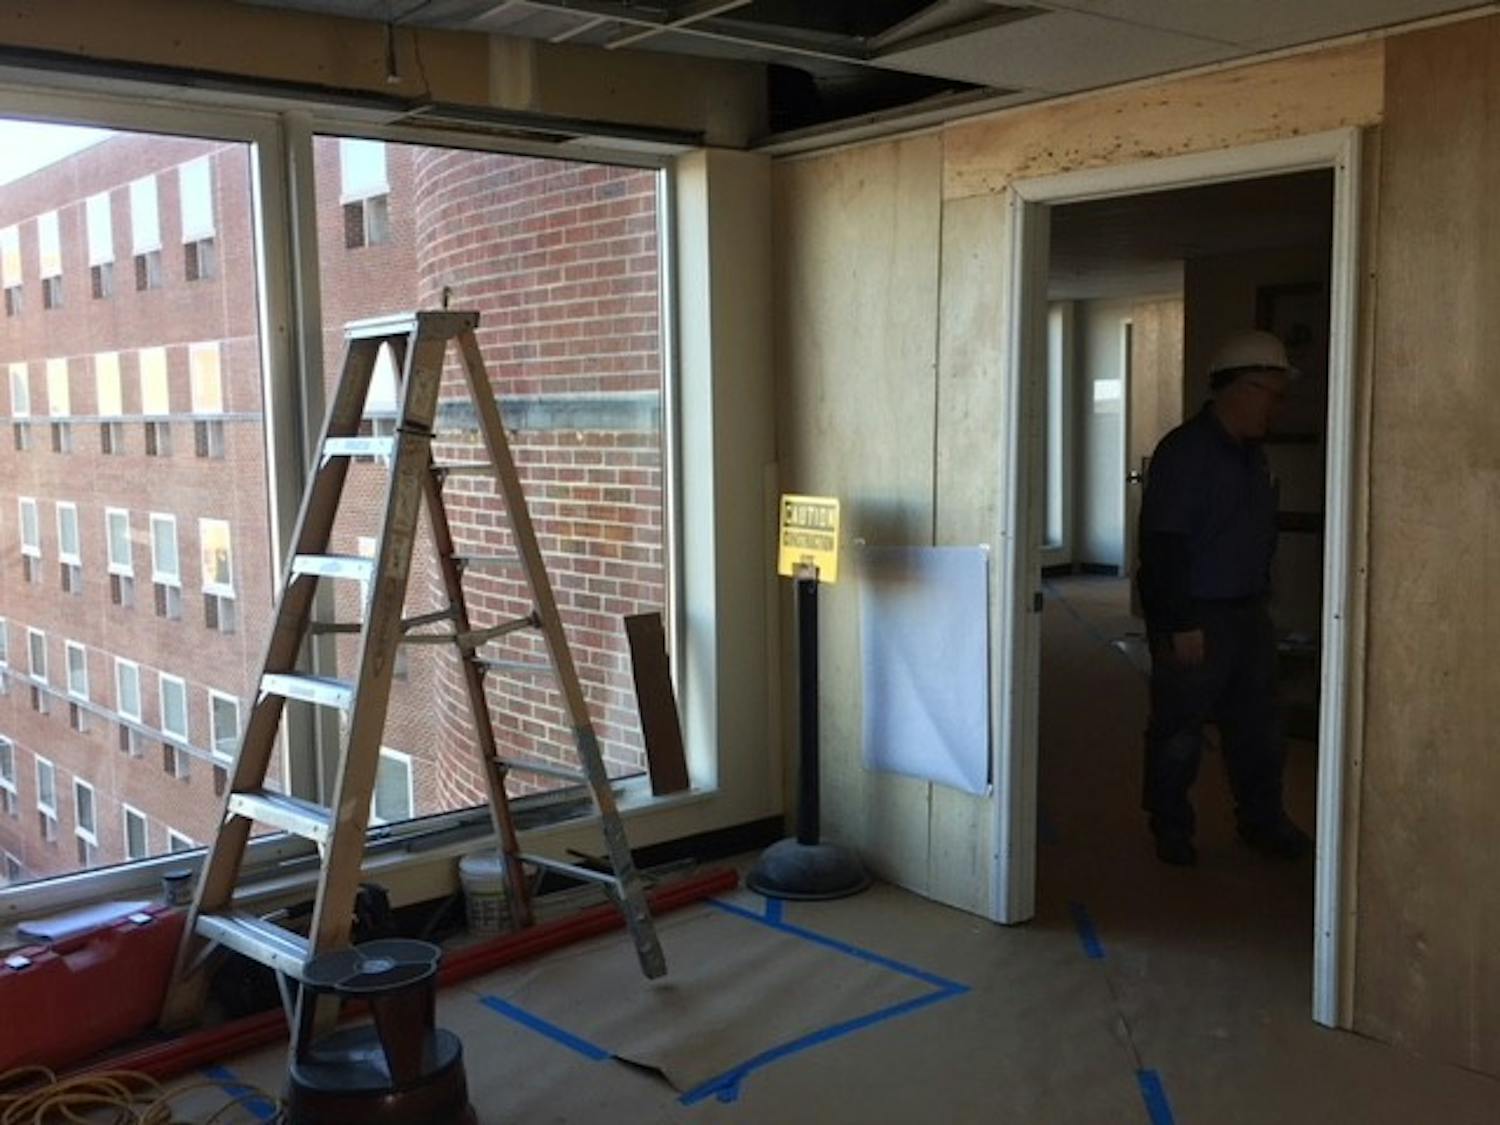 Floors 7 and 8 in Davis Library are under construction. 